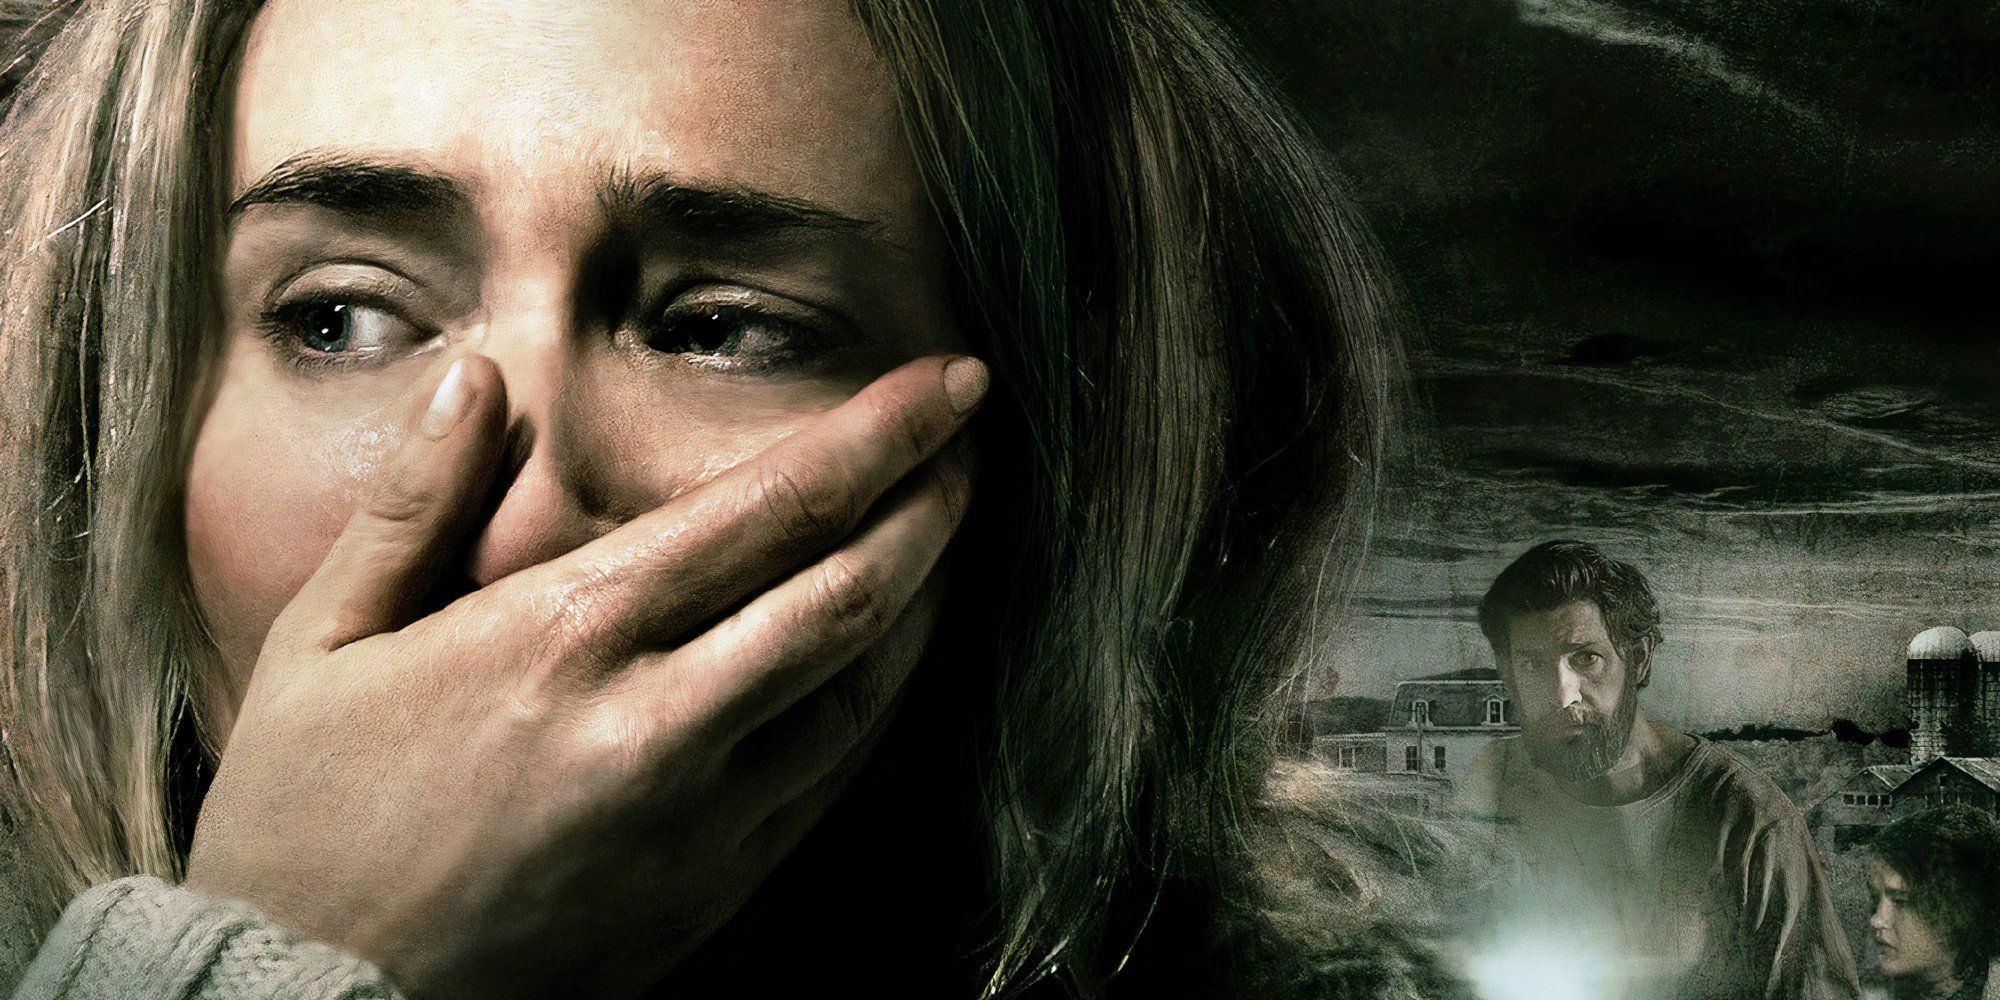 Emily Blunt with her hand over her mouth in the A Quiet Place poster